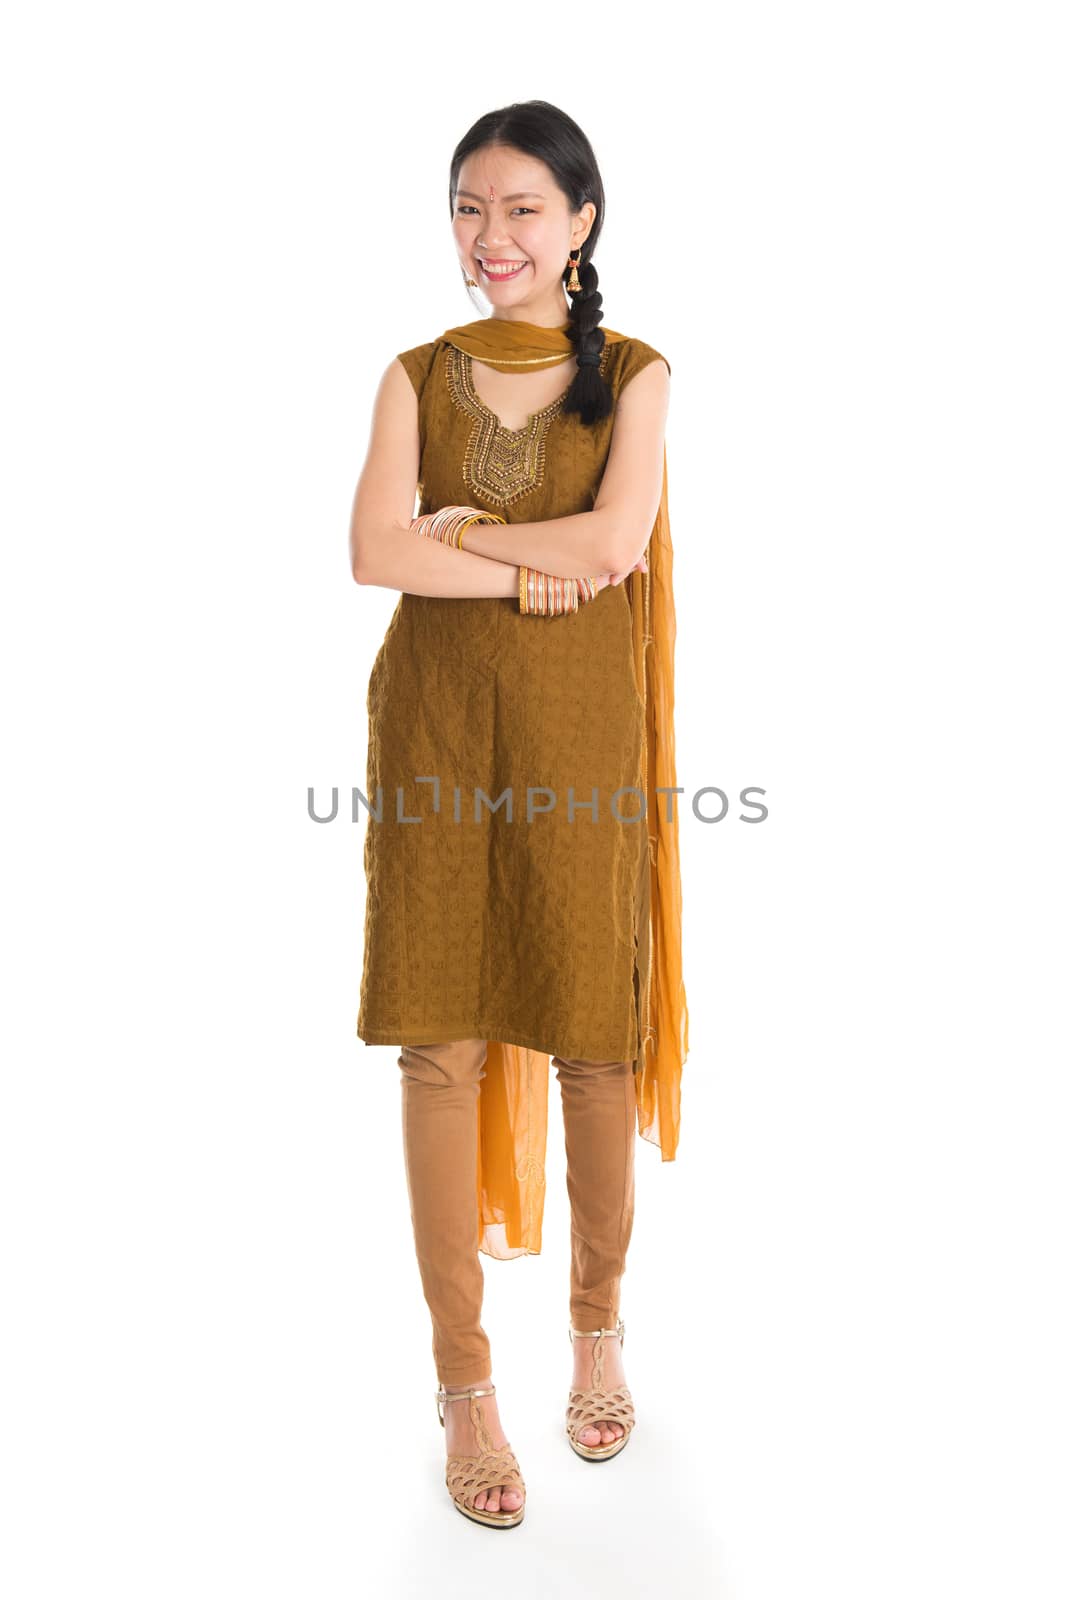 Portrait of young mixed race Indian Chinese girl in traditional punjabi dress smiling and looking at camera, full length standing isolated on white background.